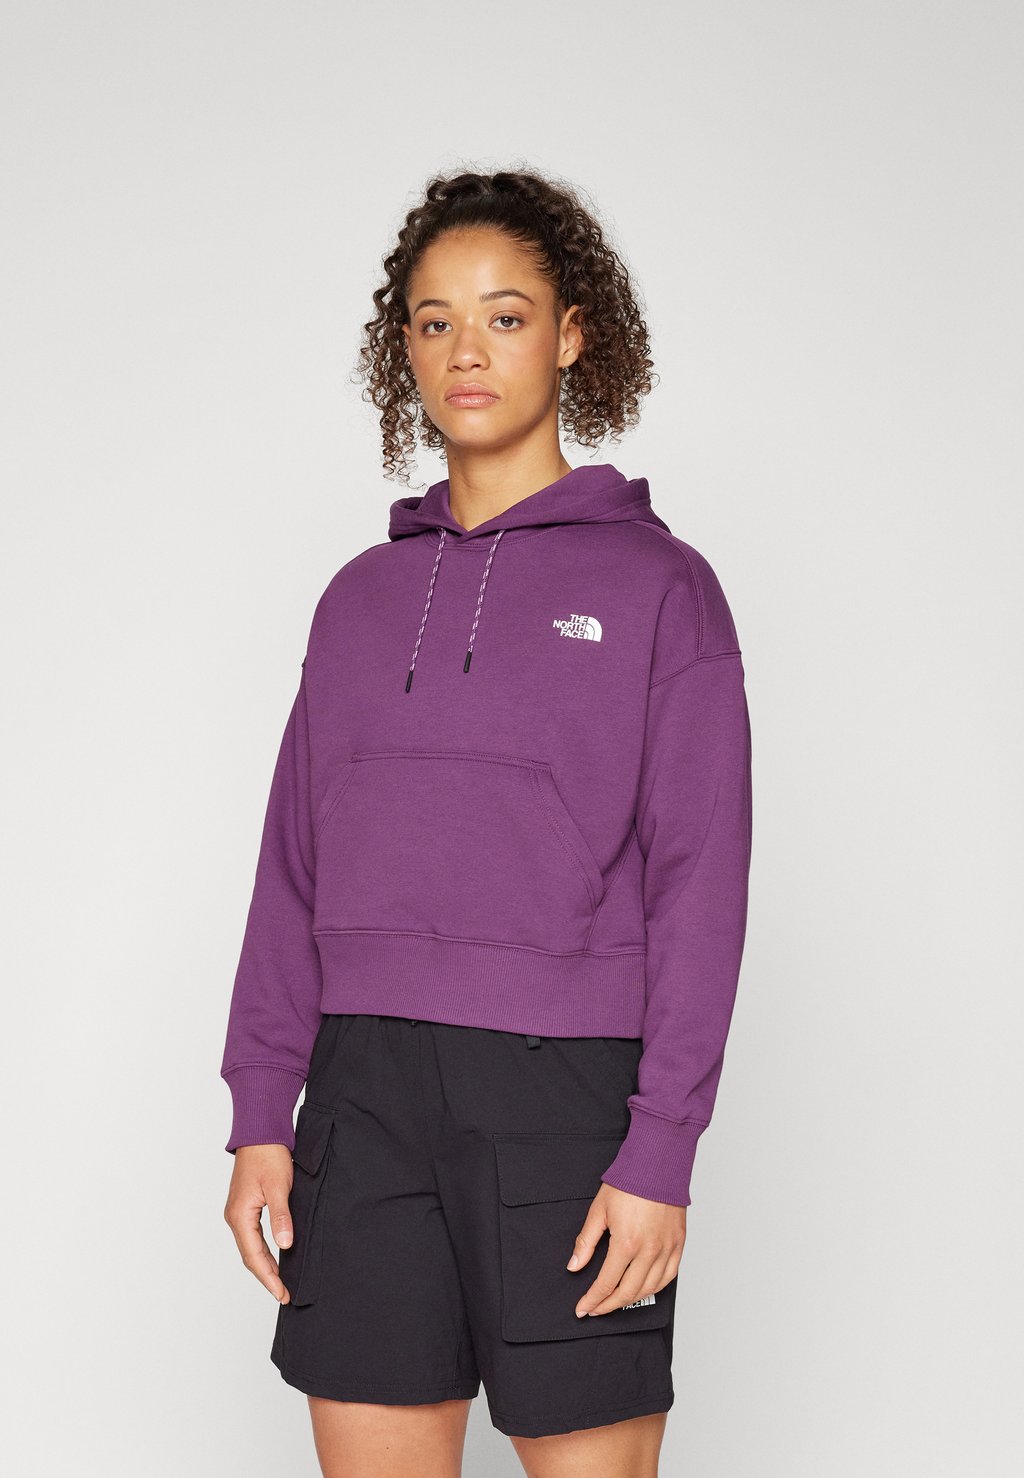 Толстовка OUTDOOR GRAPHIC HOODIE The North Face, цвет black currant/purple